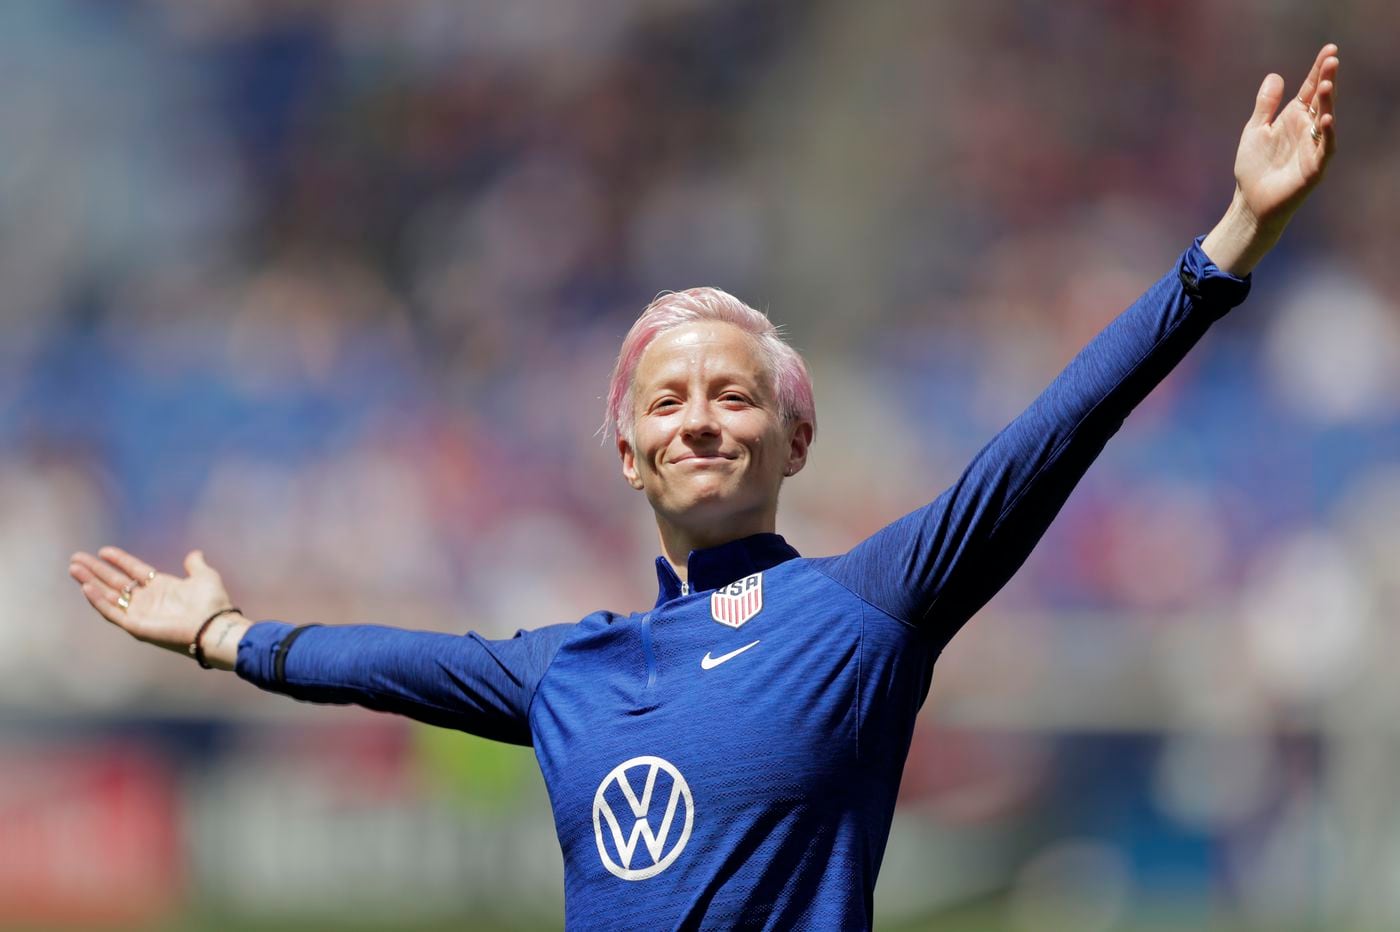 Uswnts Megan Rapinoe Heads To World Cup Playing Some Of The Best Soccer Of Her Career 